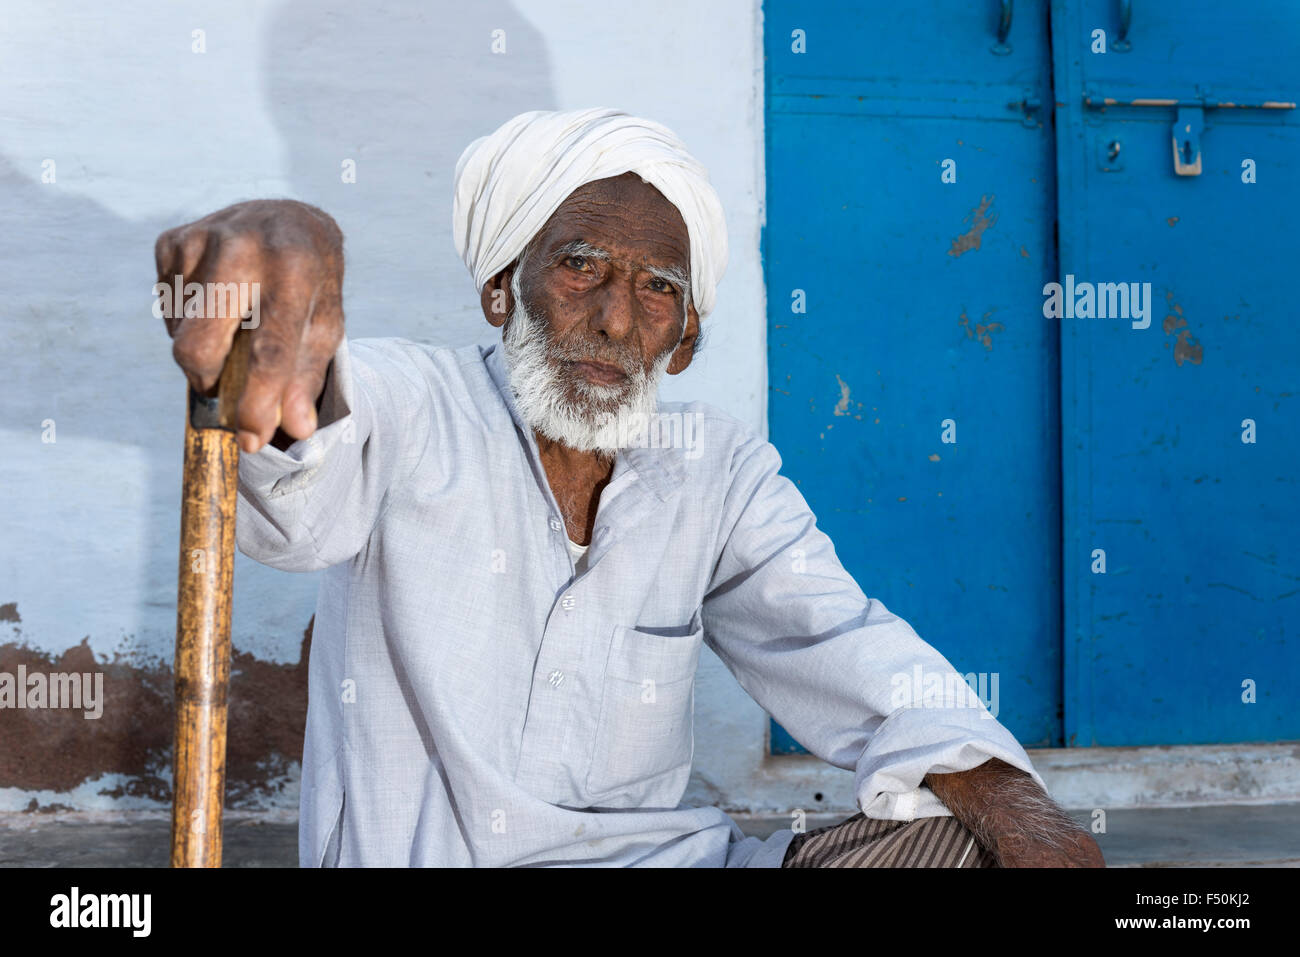 An old man with white tourban an grey beard is sitting in front of his house Stock Photo